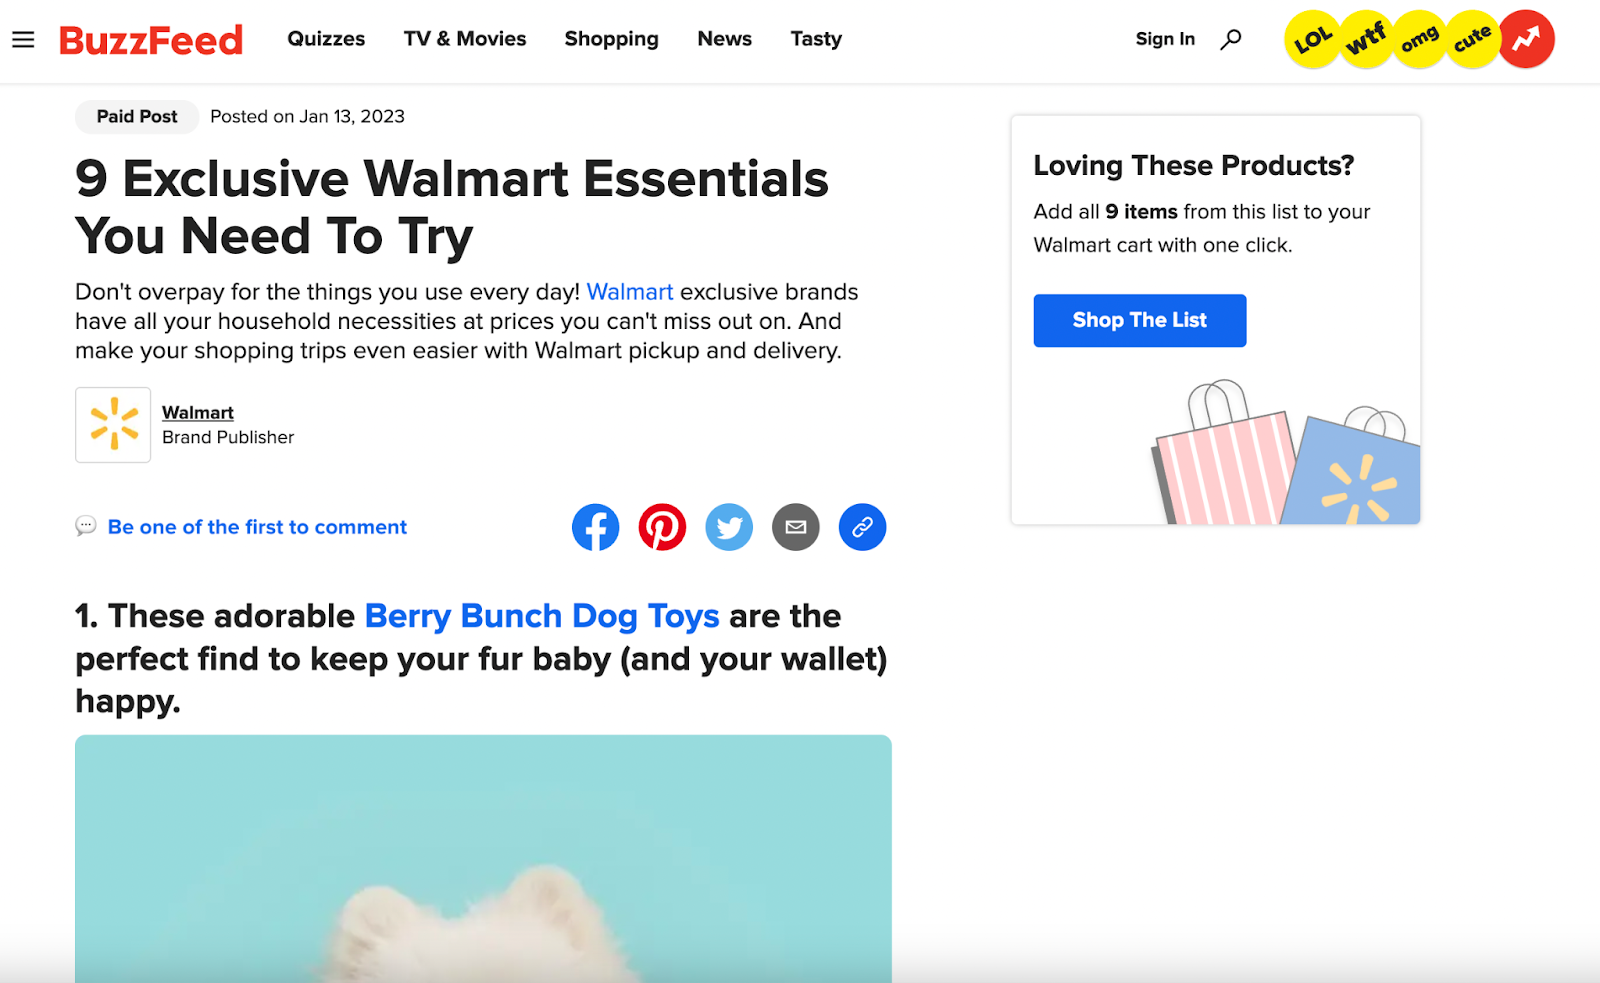 Online advertising for business: native advertising by Walmart on BuzzFeed